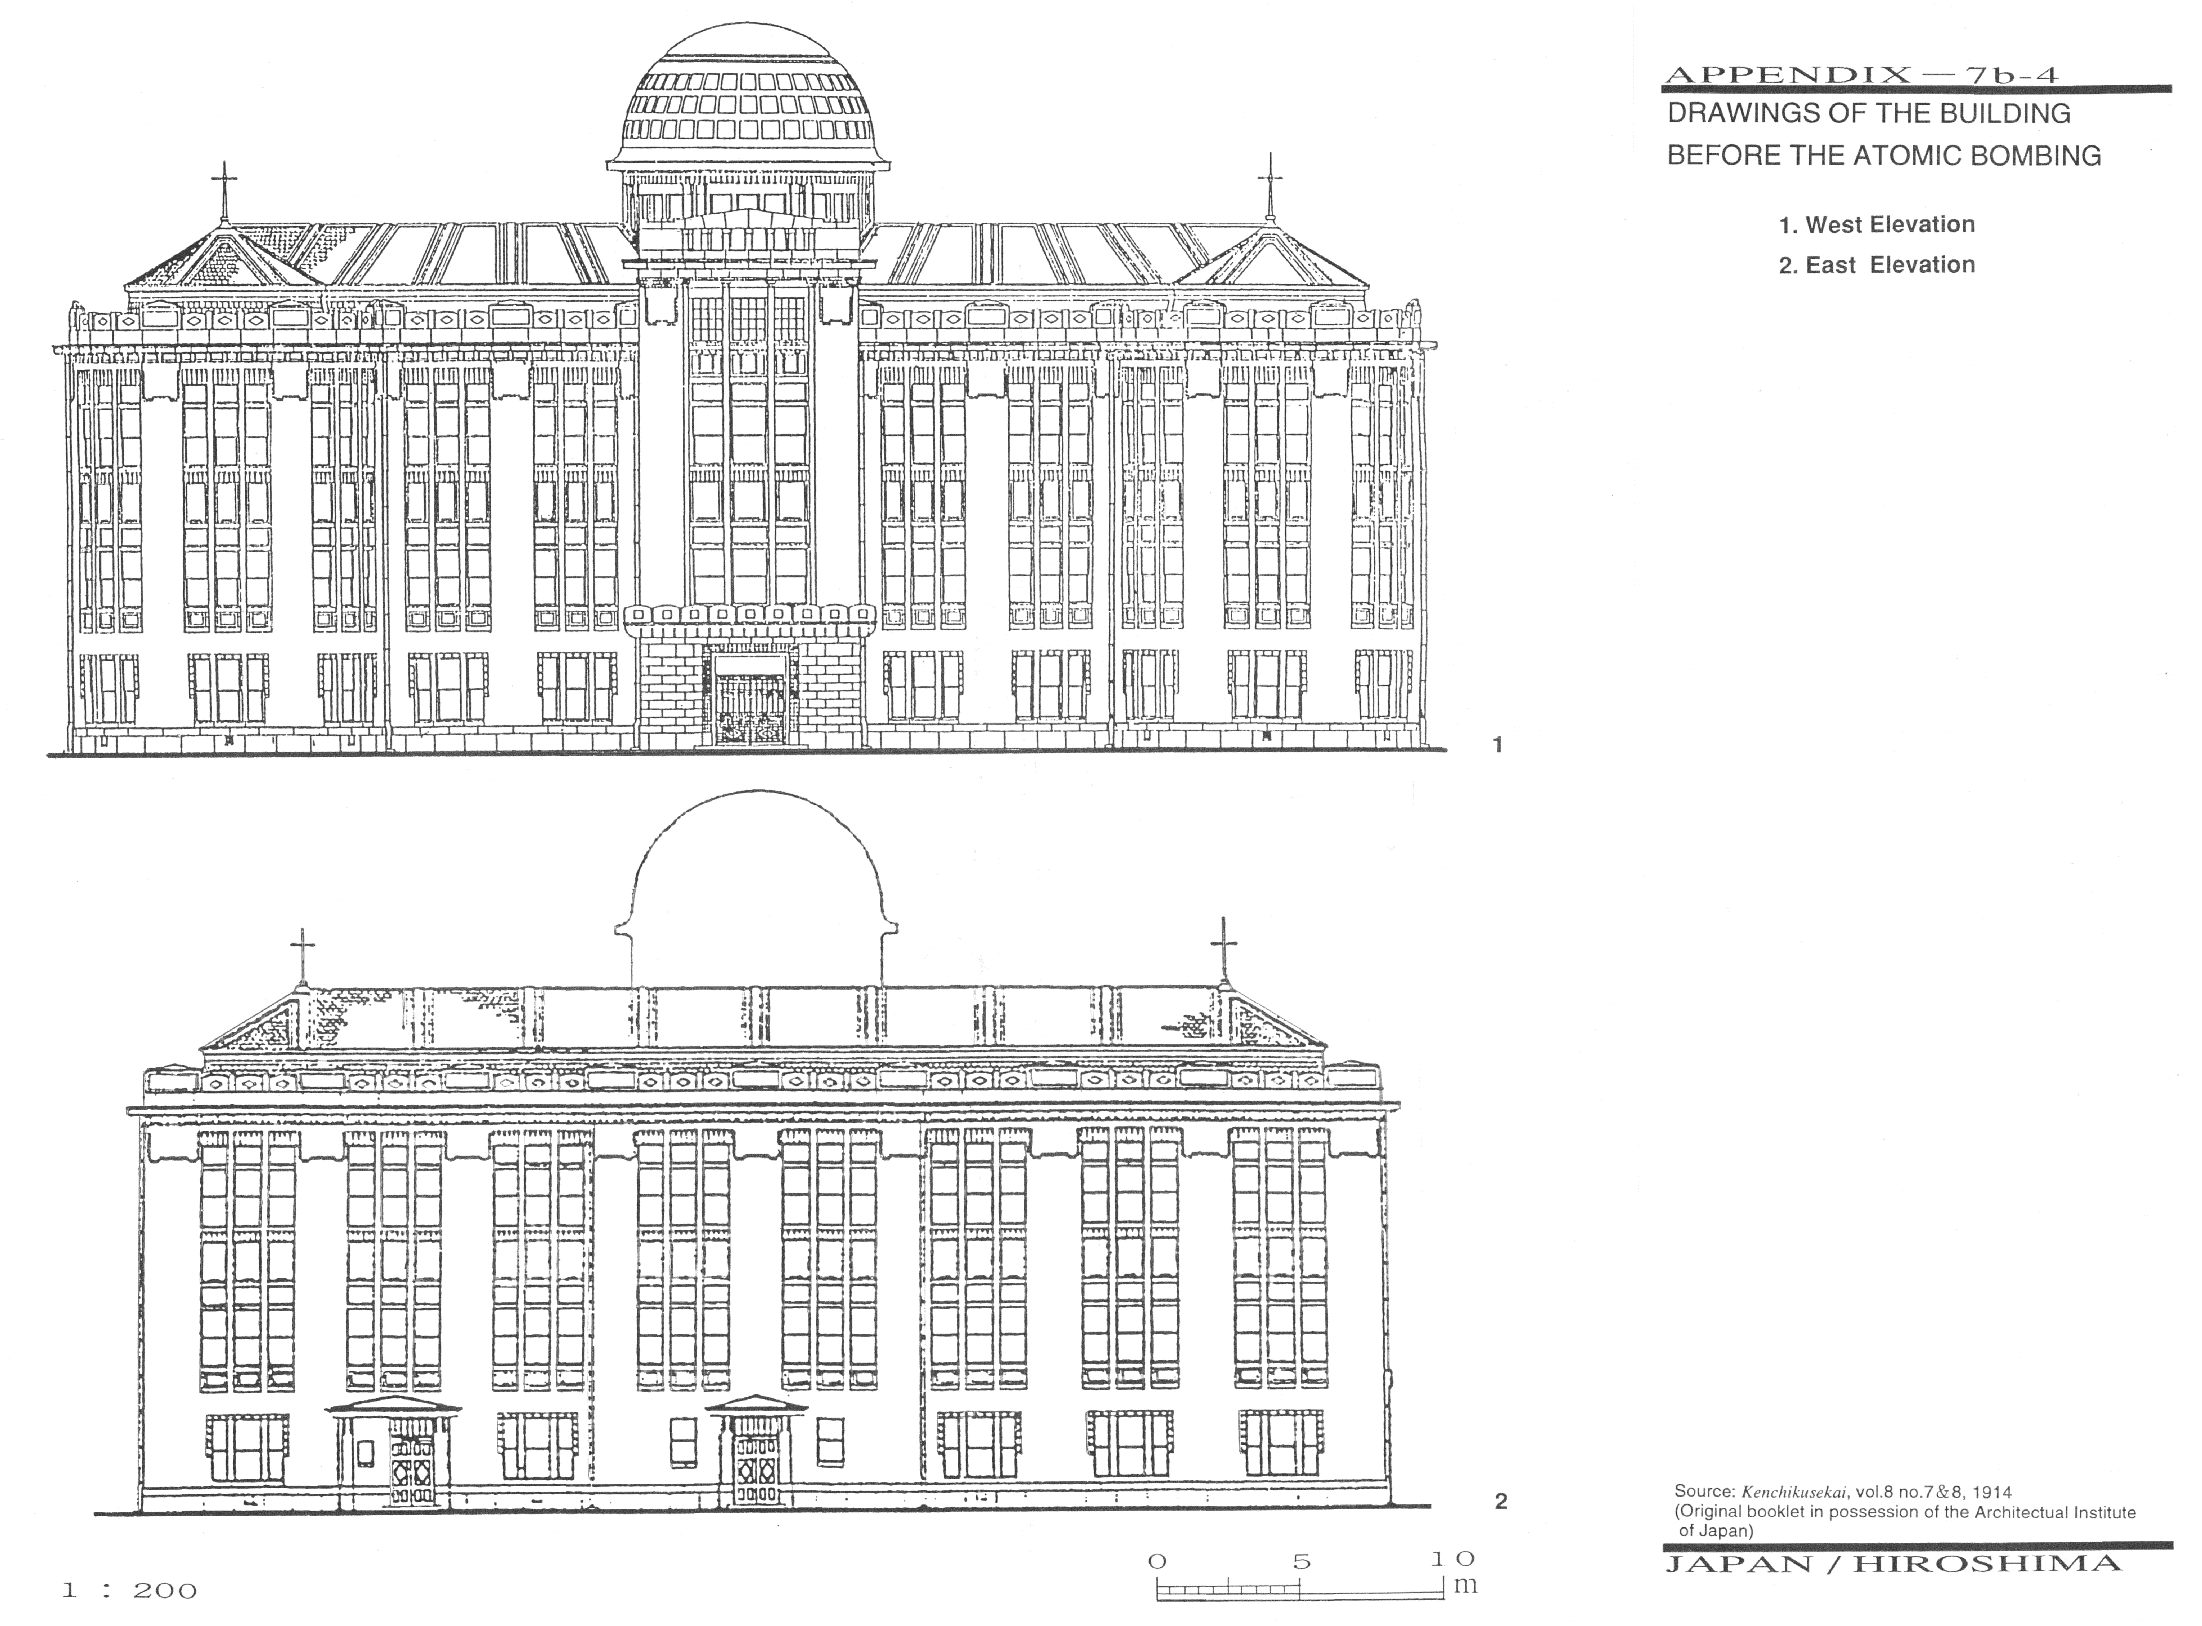 DRAWINGS OF THE BUILDING BEFORE THE ATOMIC BOMBING